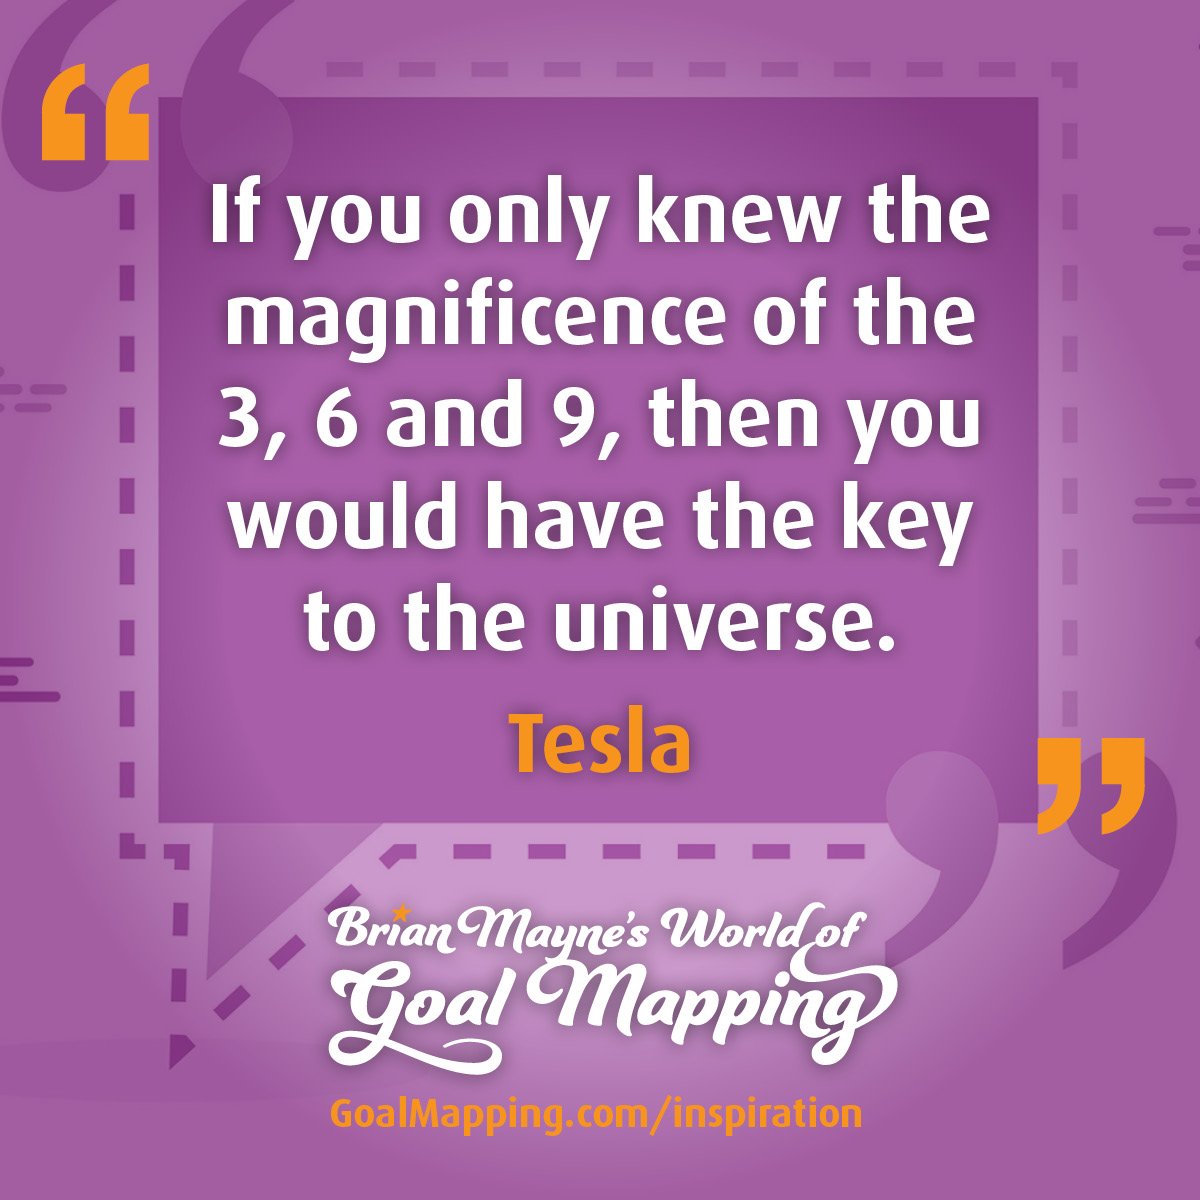 "If you only knew the magnificence of the 3, 6 and 9, then you would have the key to the universe." Tesla